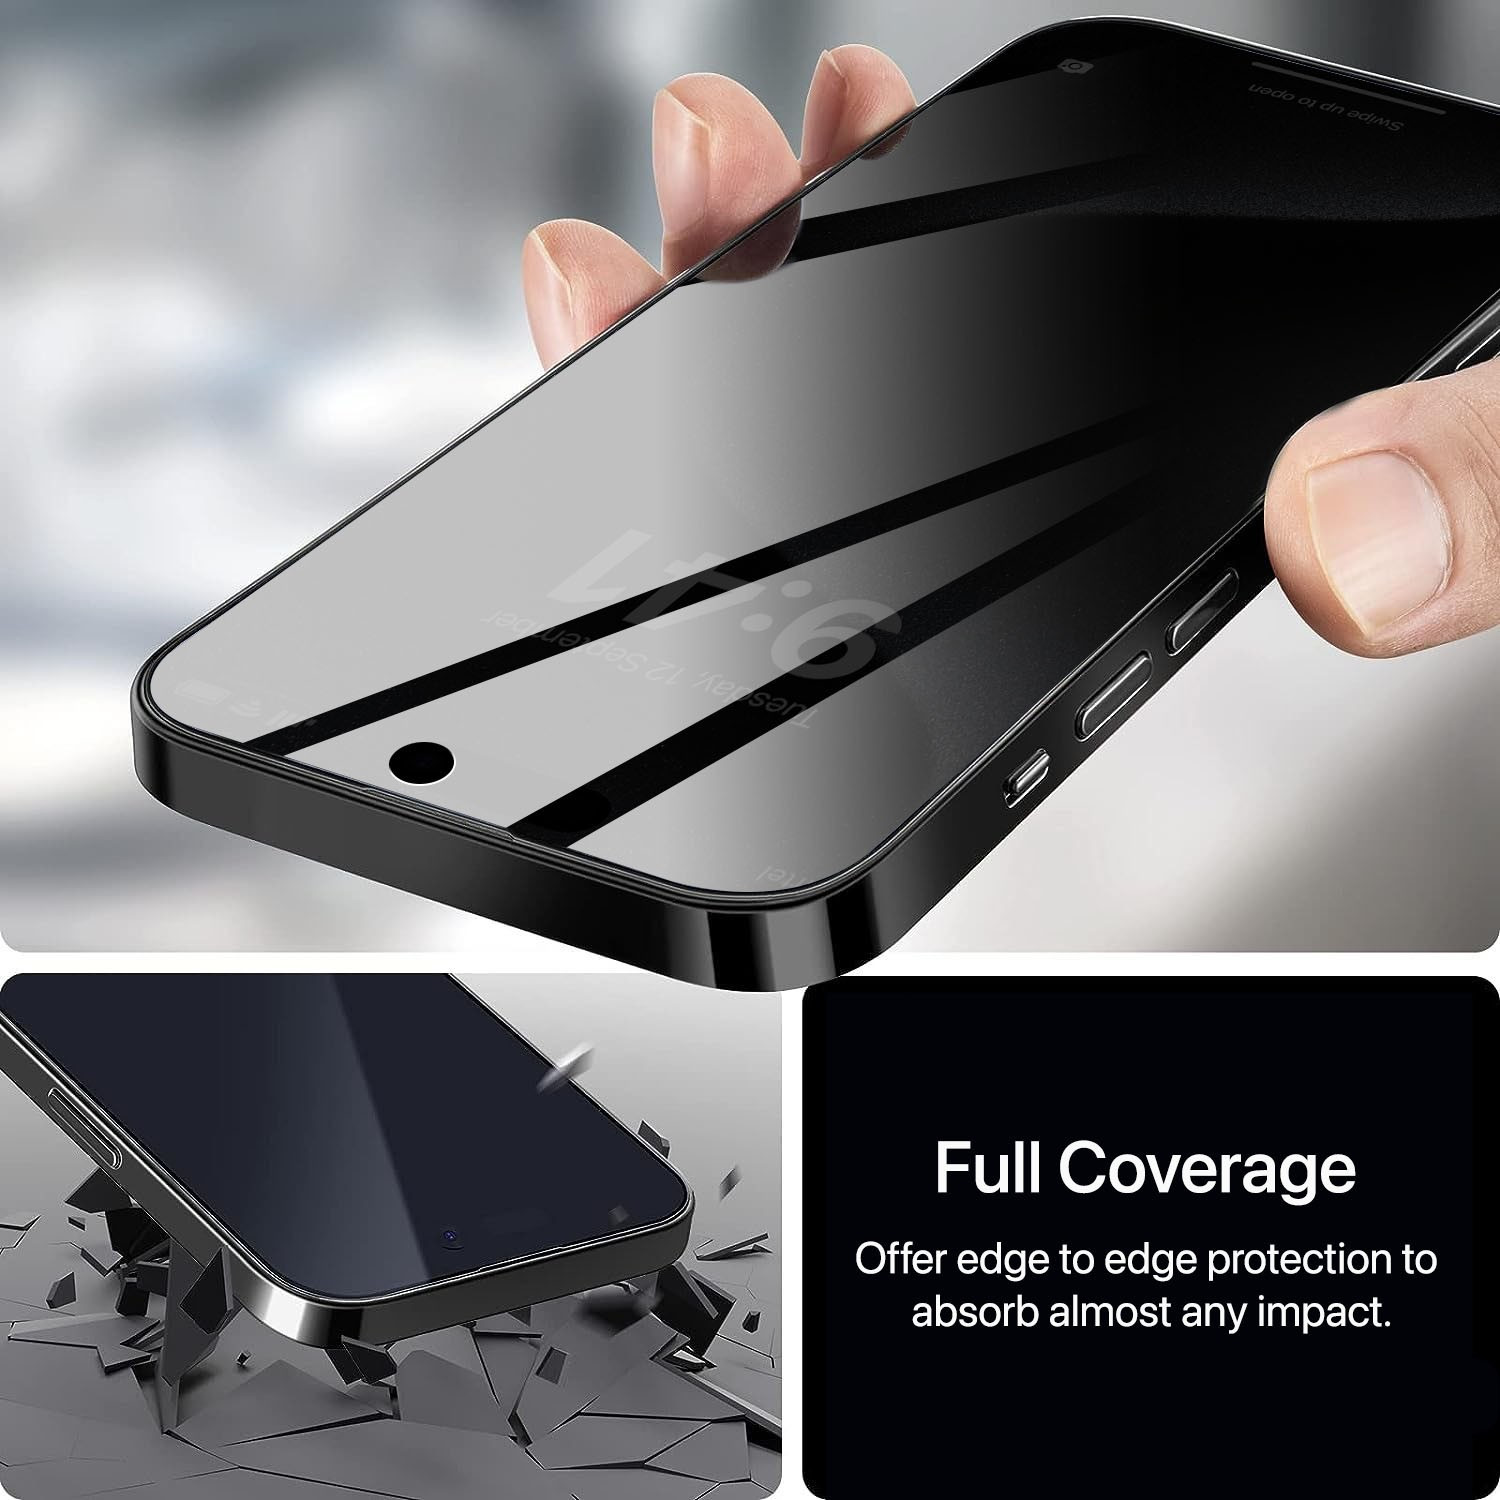 Privacy Anti-Spy Tempered Glass Screen Protector For iPhone 11 13 14 15 Pro  Max